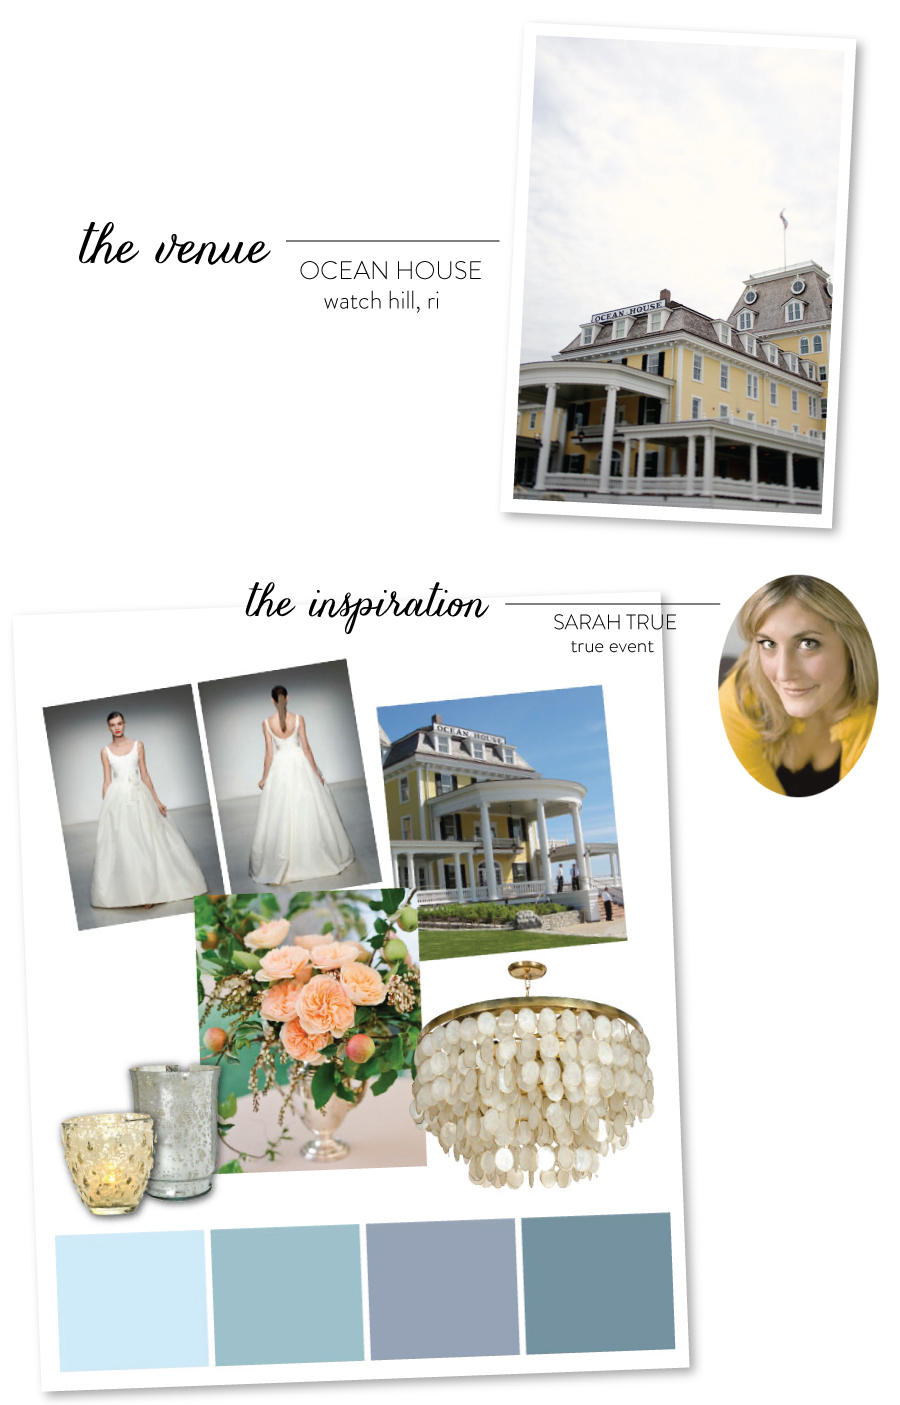 Couture Bridal Event: True Event and The White Dress by the shore Featured on Style Me Pretty. Desktop Image